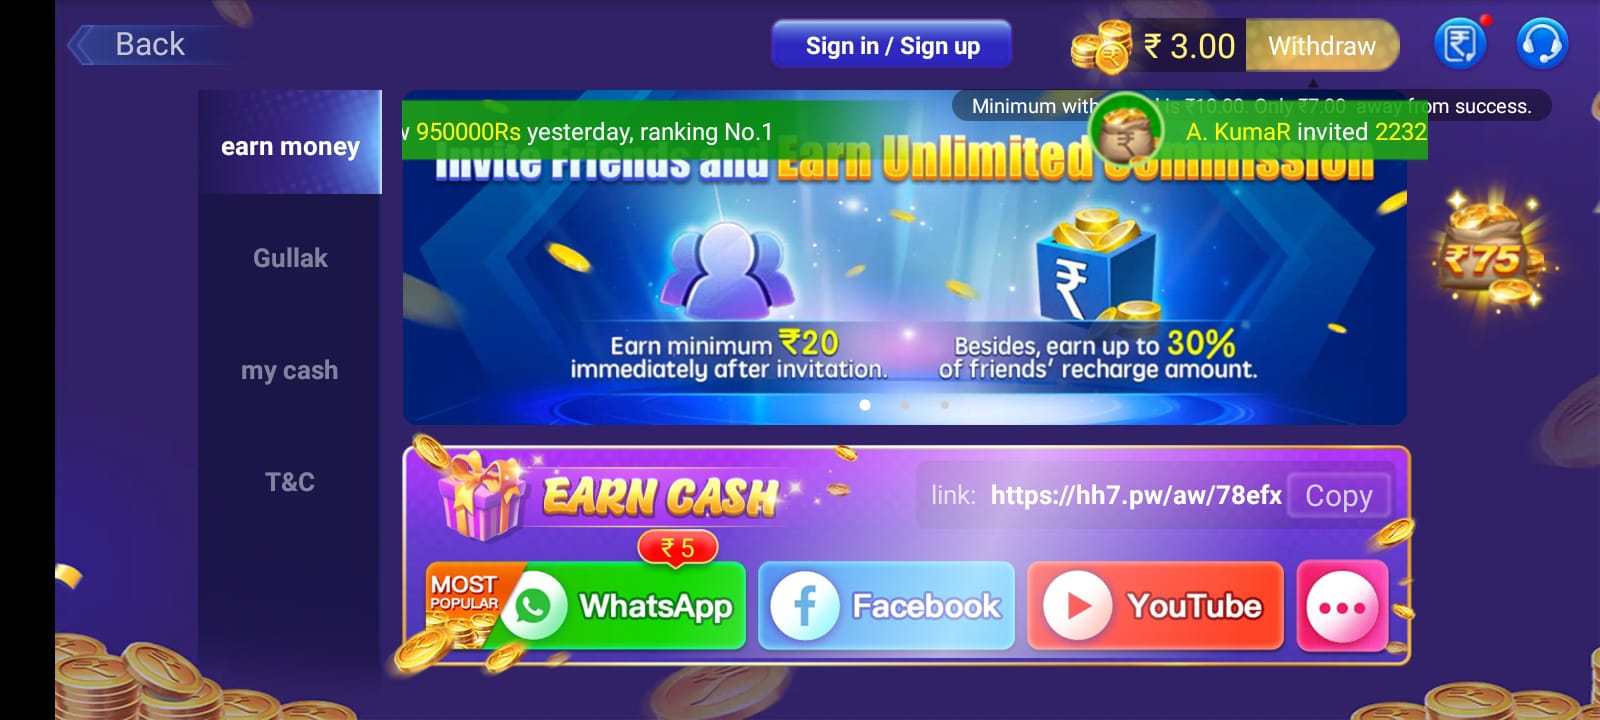 Refer&Earn in Teen Patti Passion App